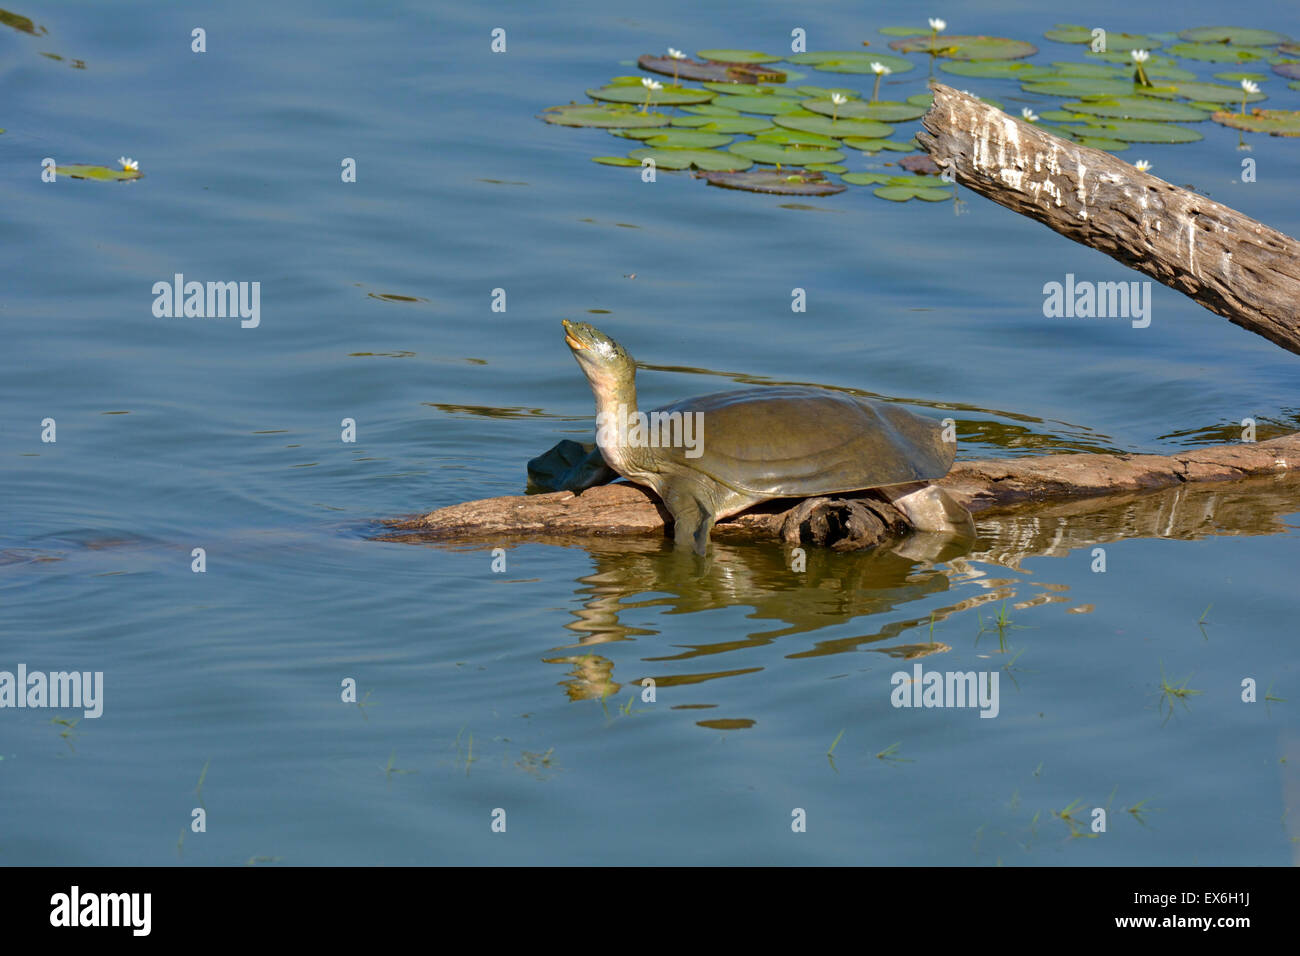 Indian softshell turtle (Nilssonia gangetica) roosting on a tree trunk in the blue water of a lake Stock Photo